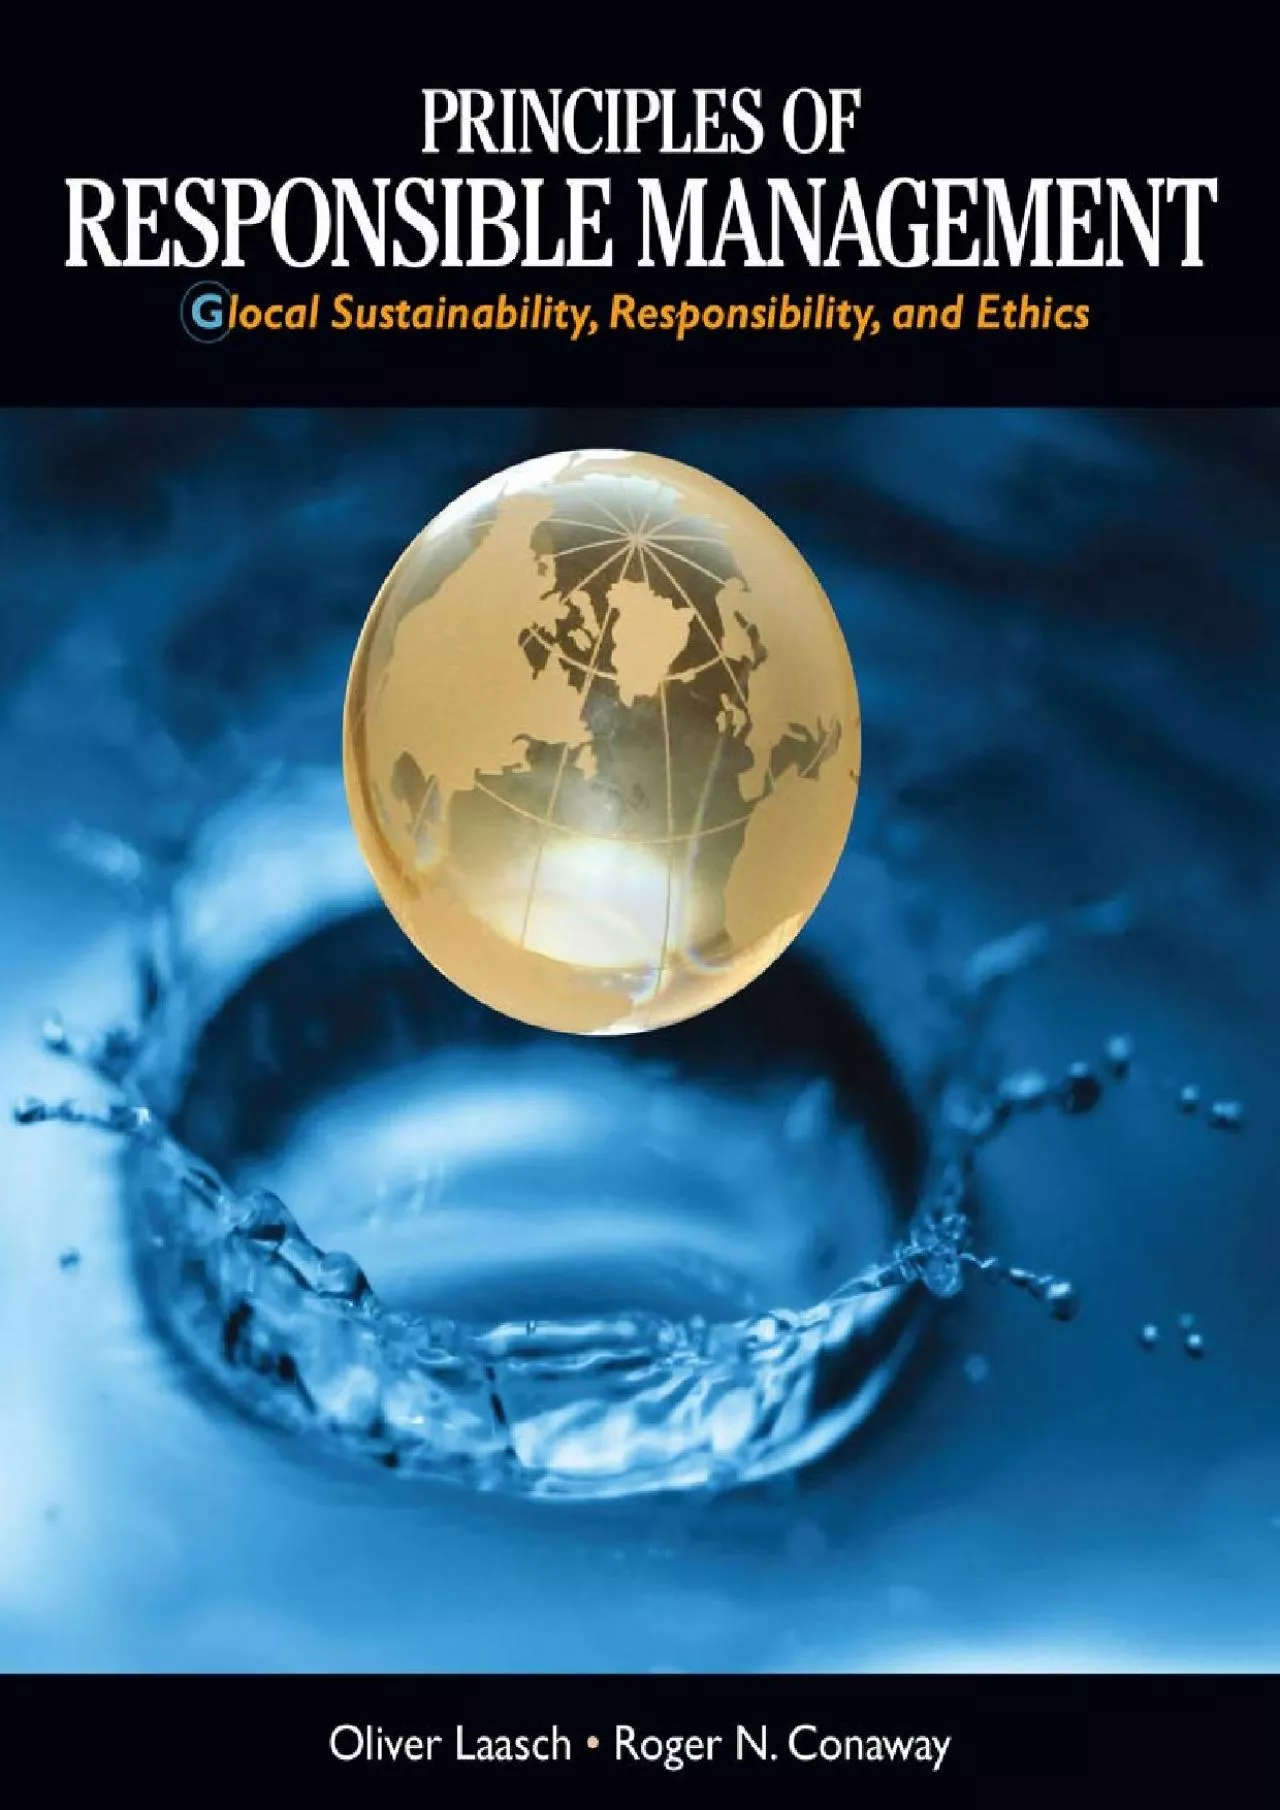 (BOOK)-Principles of Responsible Management: Global Sustainability, Responsibility, and